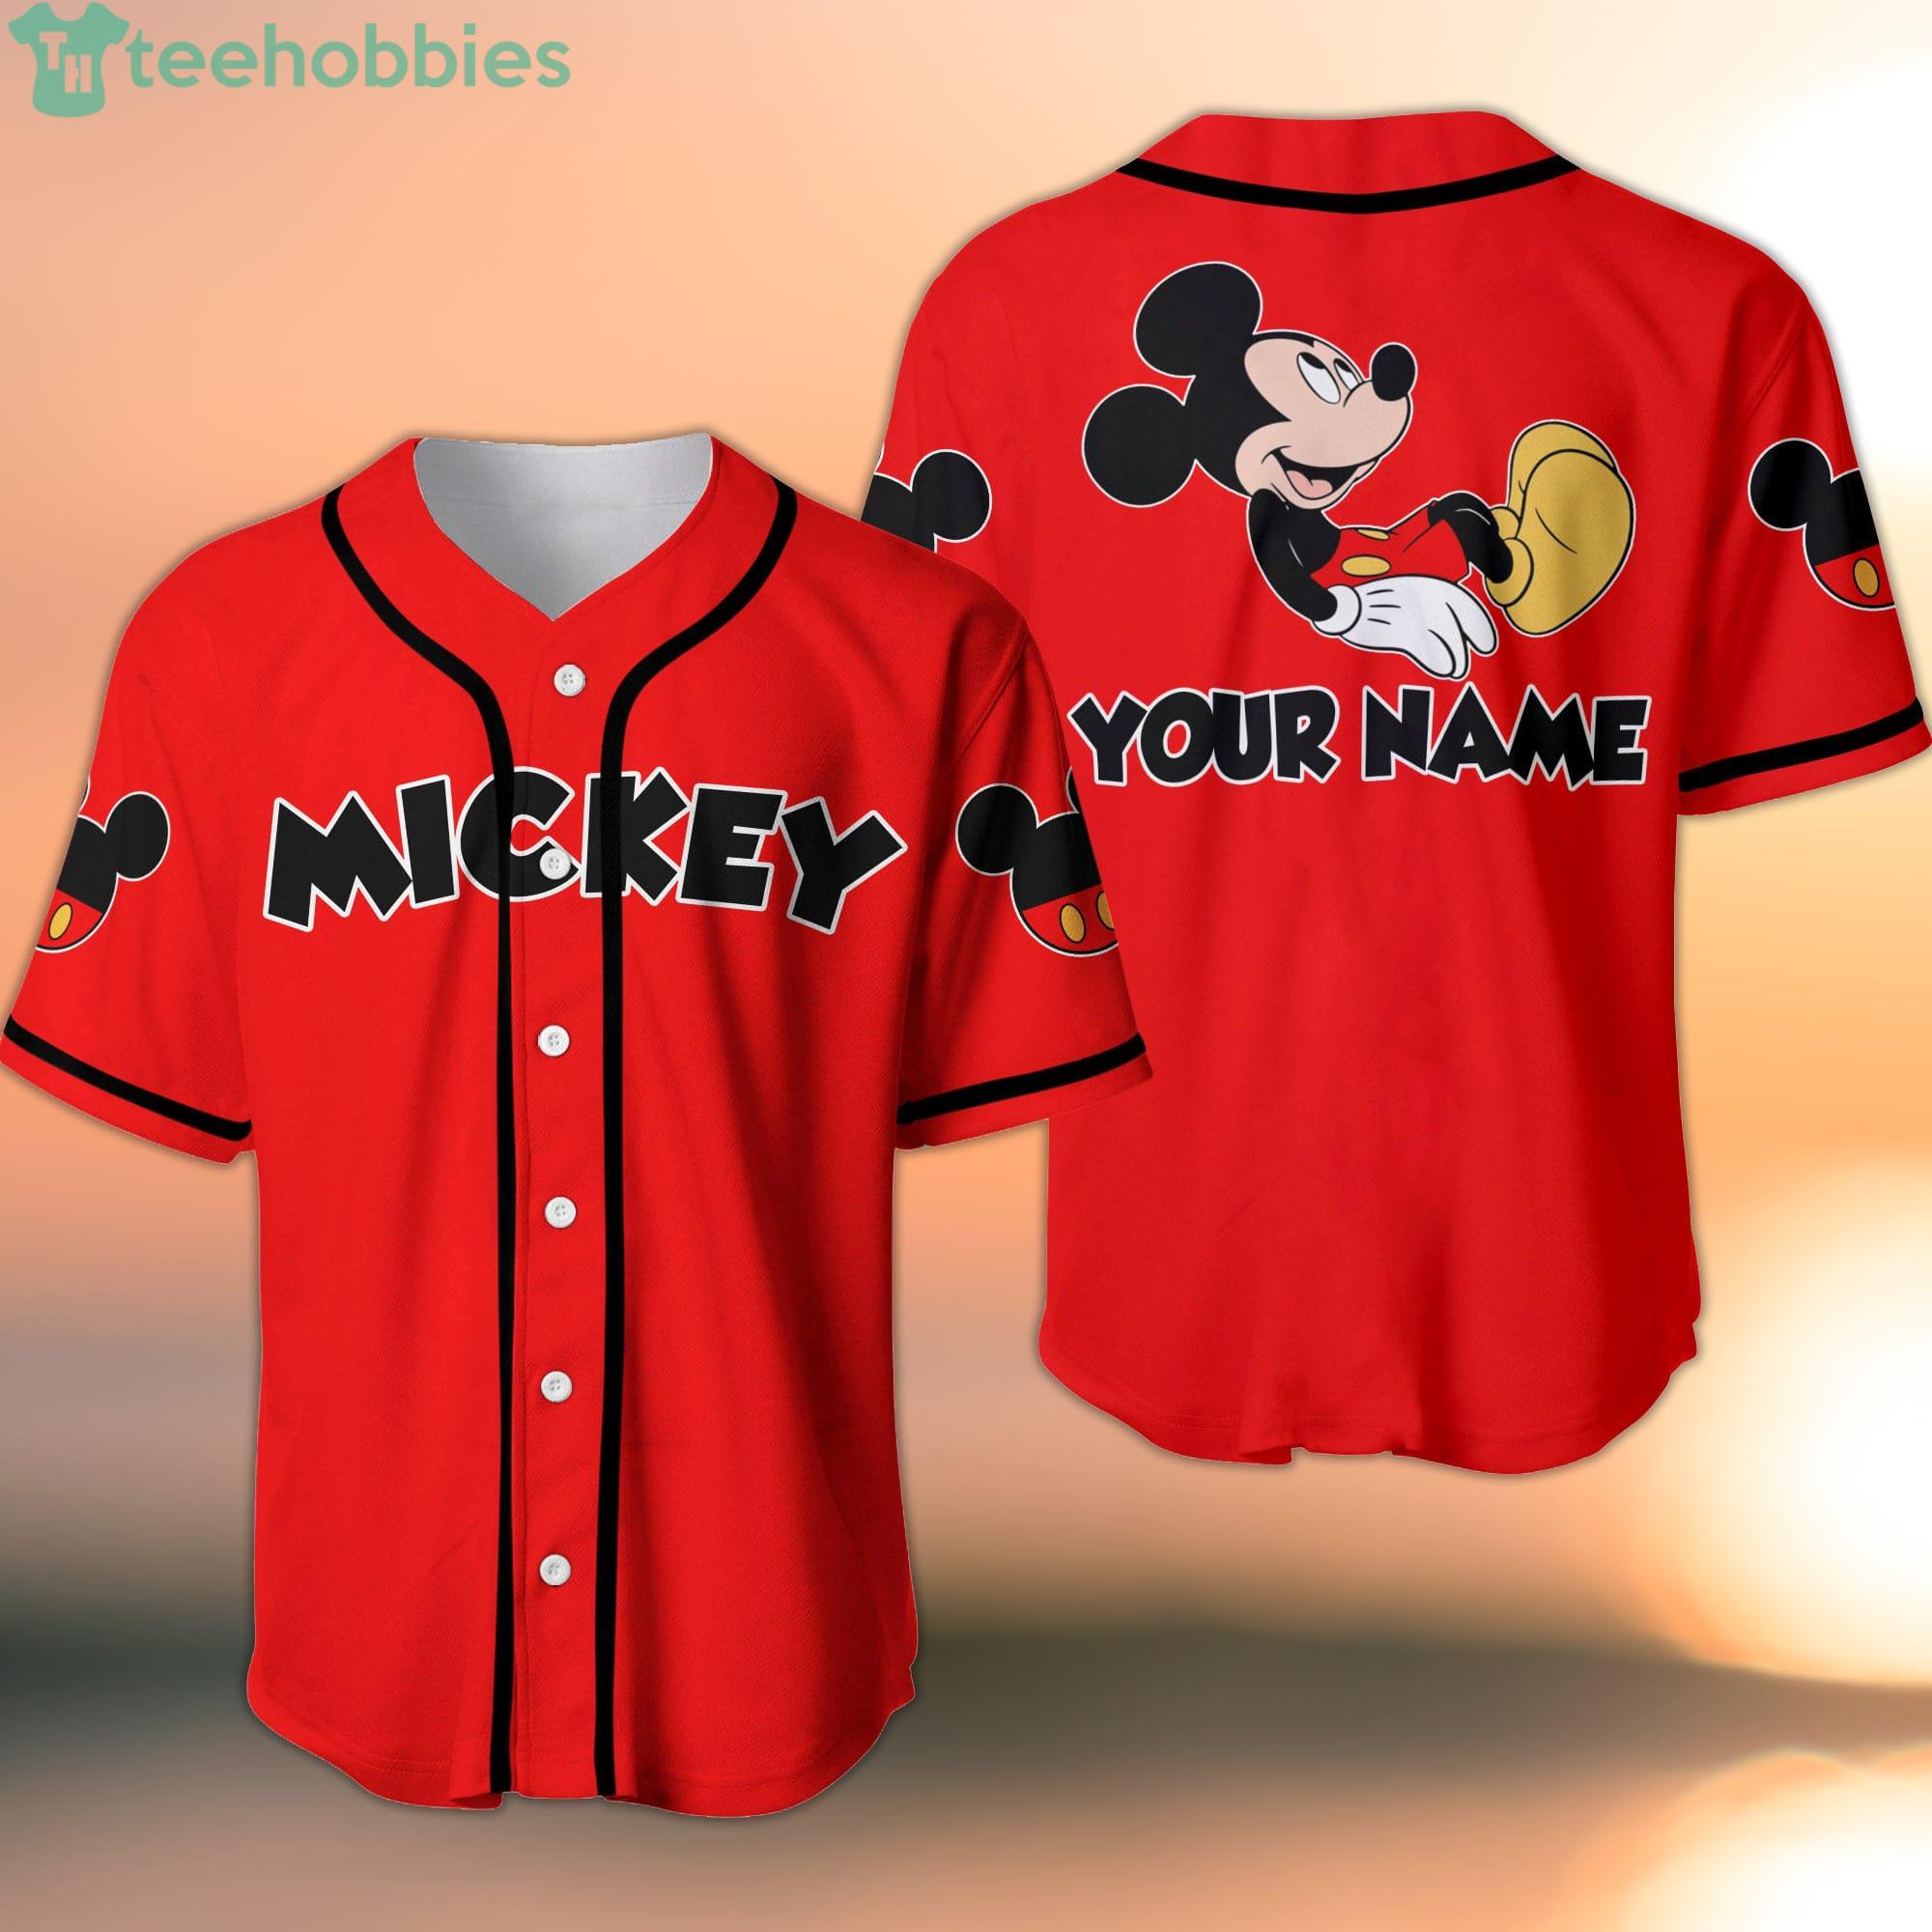 Custom Name And Number For Disney Fans Lightning Mcqueen Racing Champion  Speed Red White Baseball Jersey Shirt